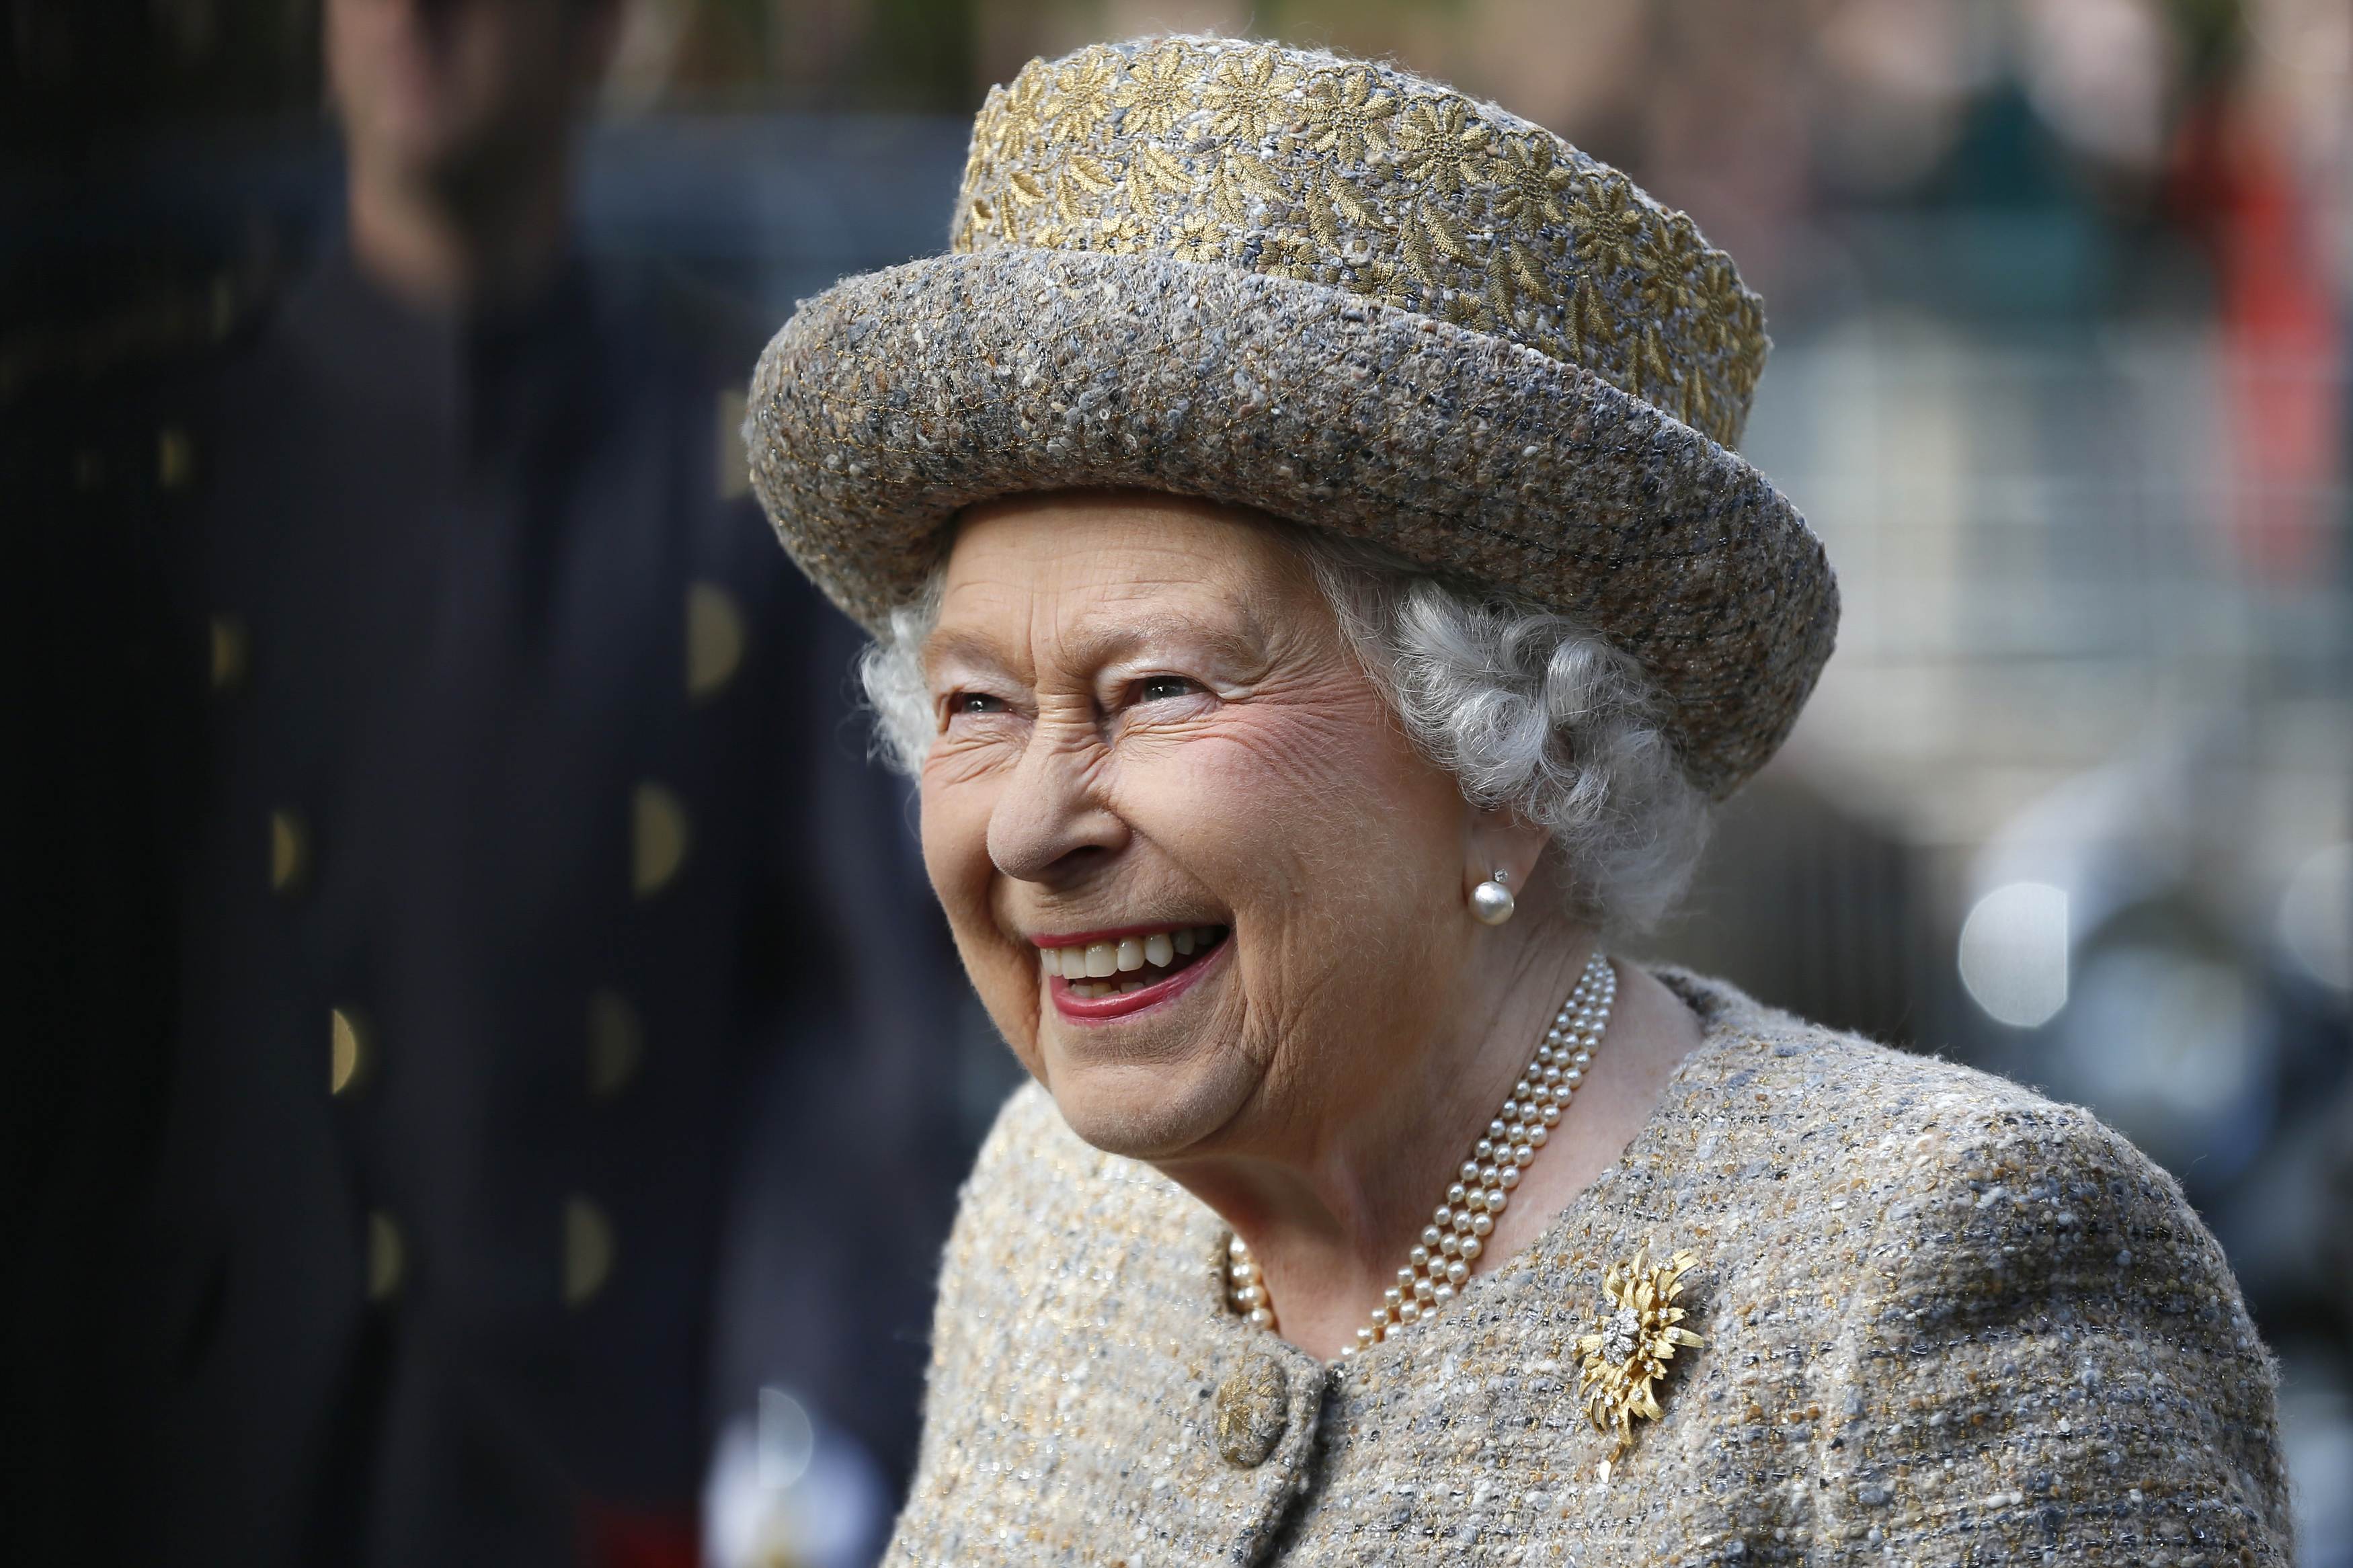 Queen Elizabeth II smiles as she arrives before the Flanders' Fields Memorial Garden opening at Wellington Barracks on November 6, 2014, in London, England. | Source: Getty Images